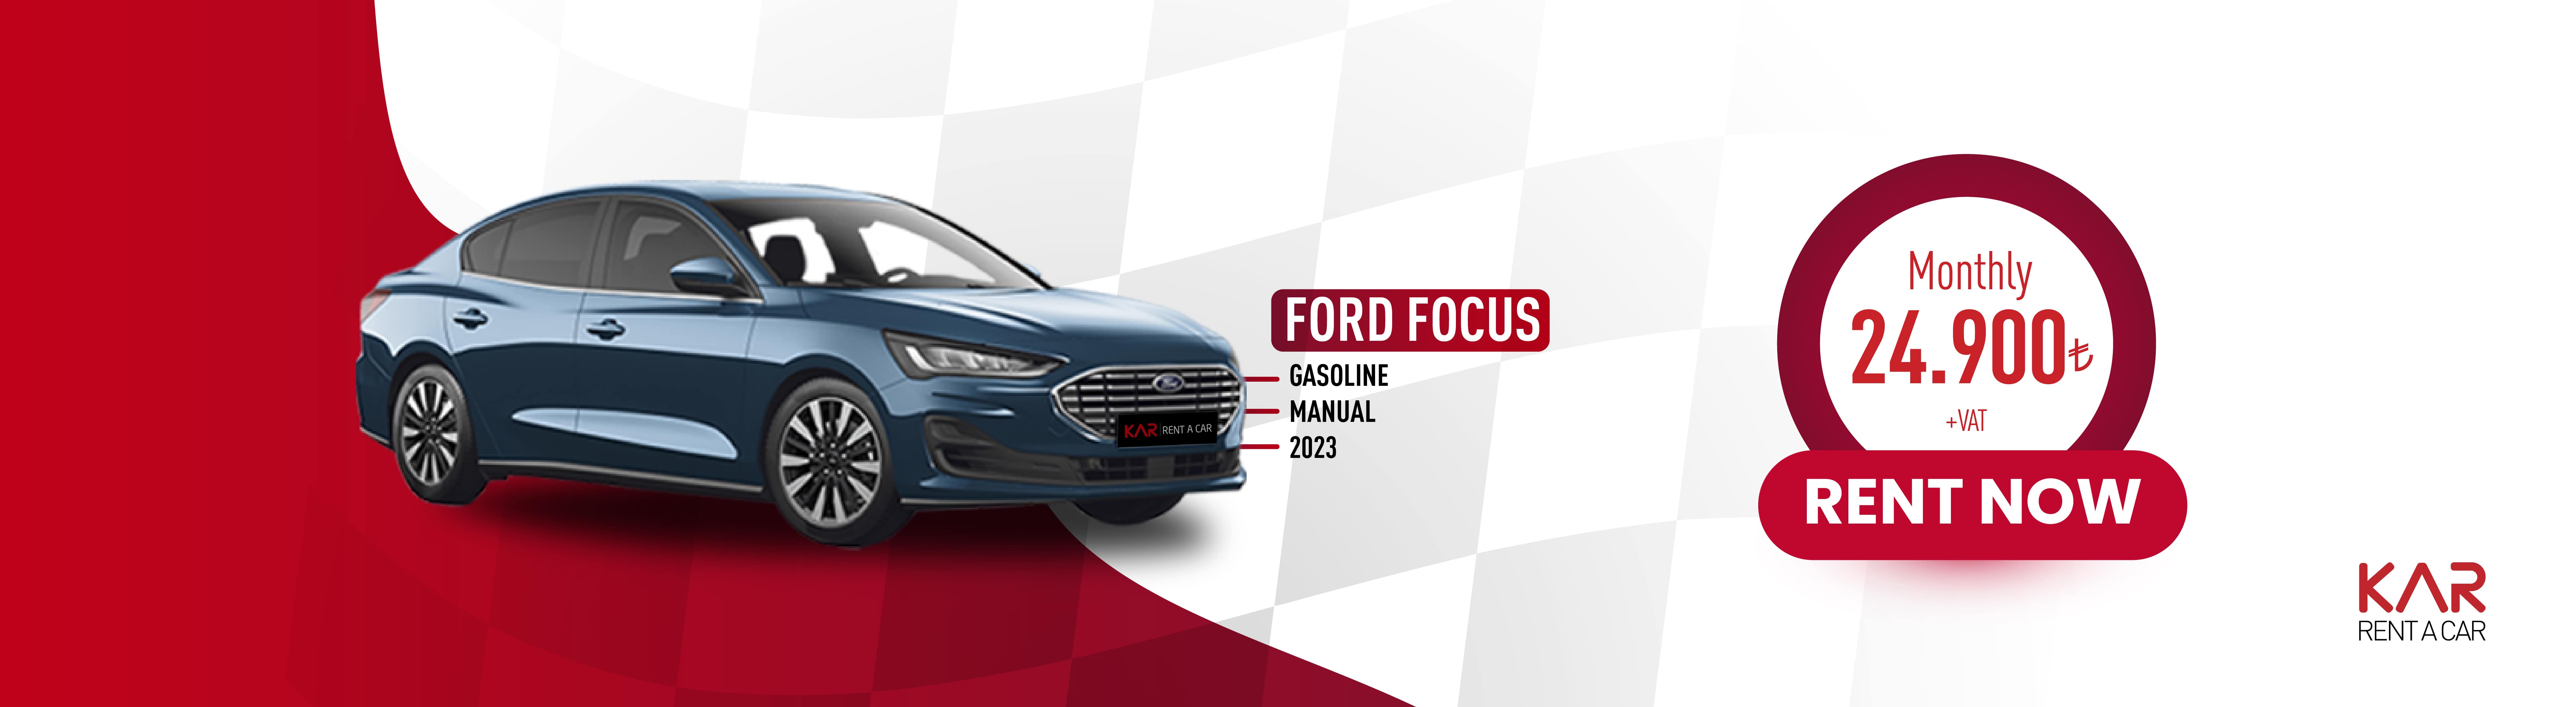 Ford Focus Campaign